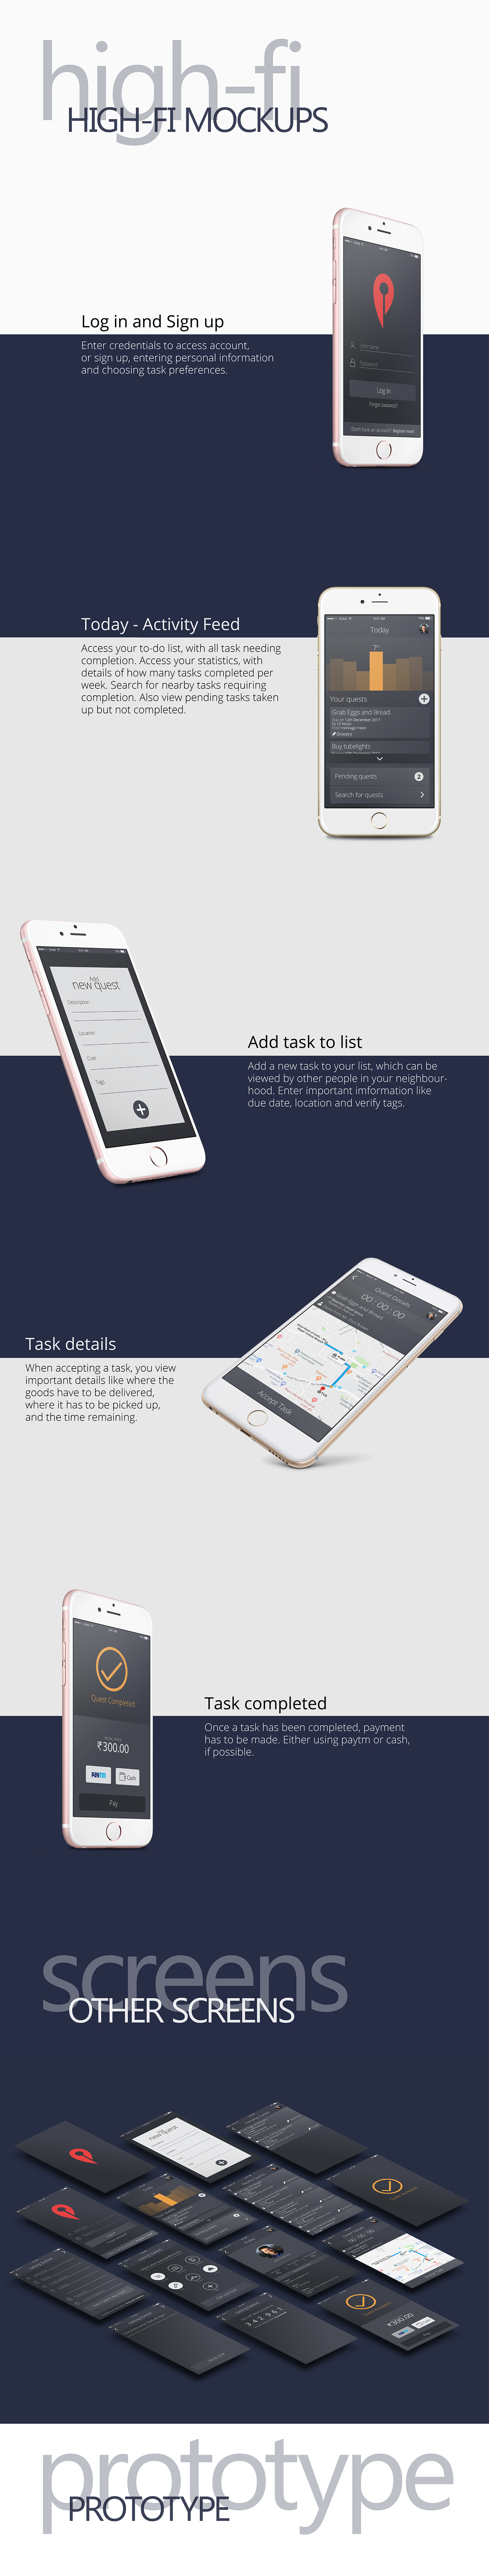 polo task sharing mobile app blue black gradient UI/UX interaction